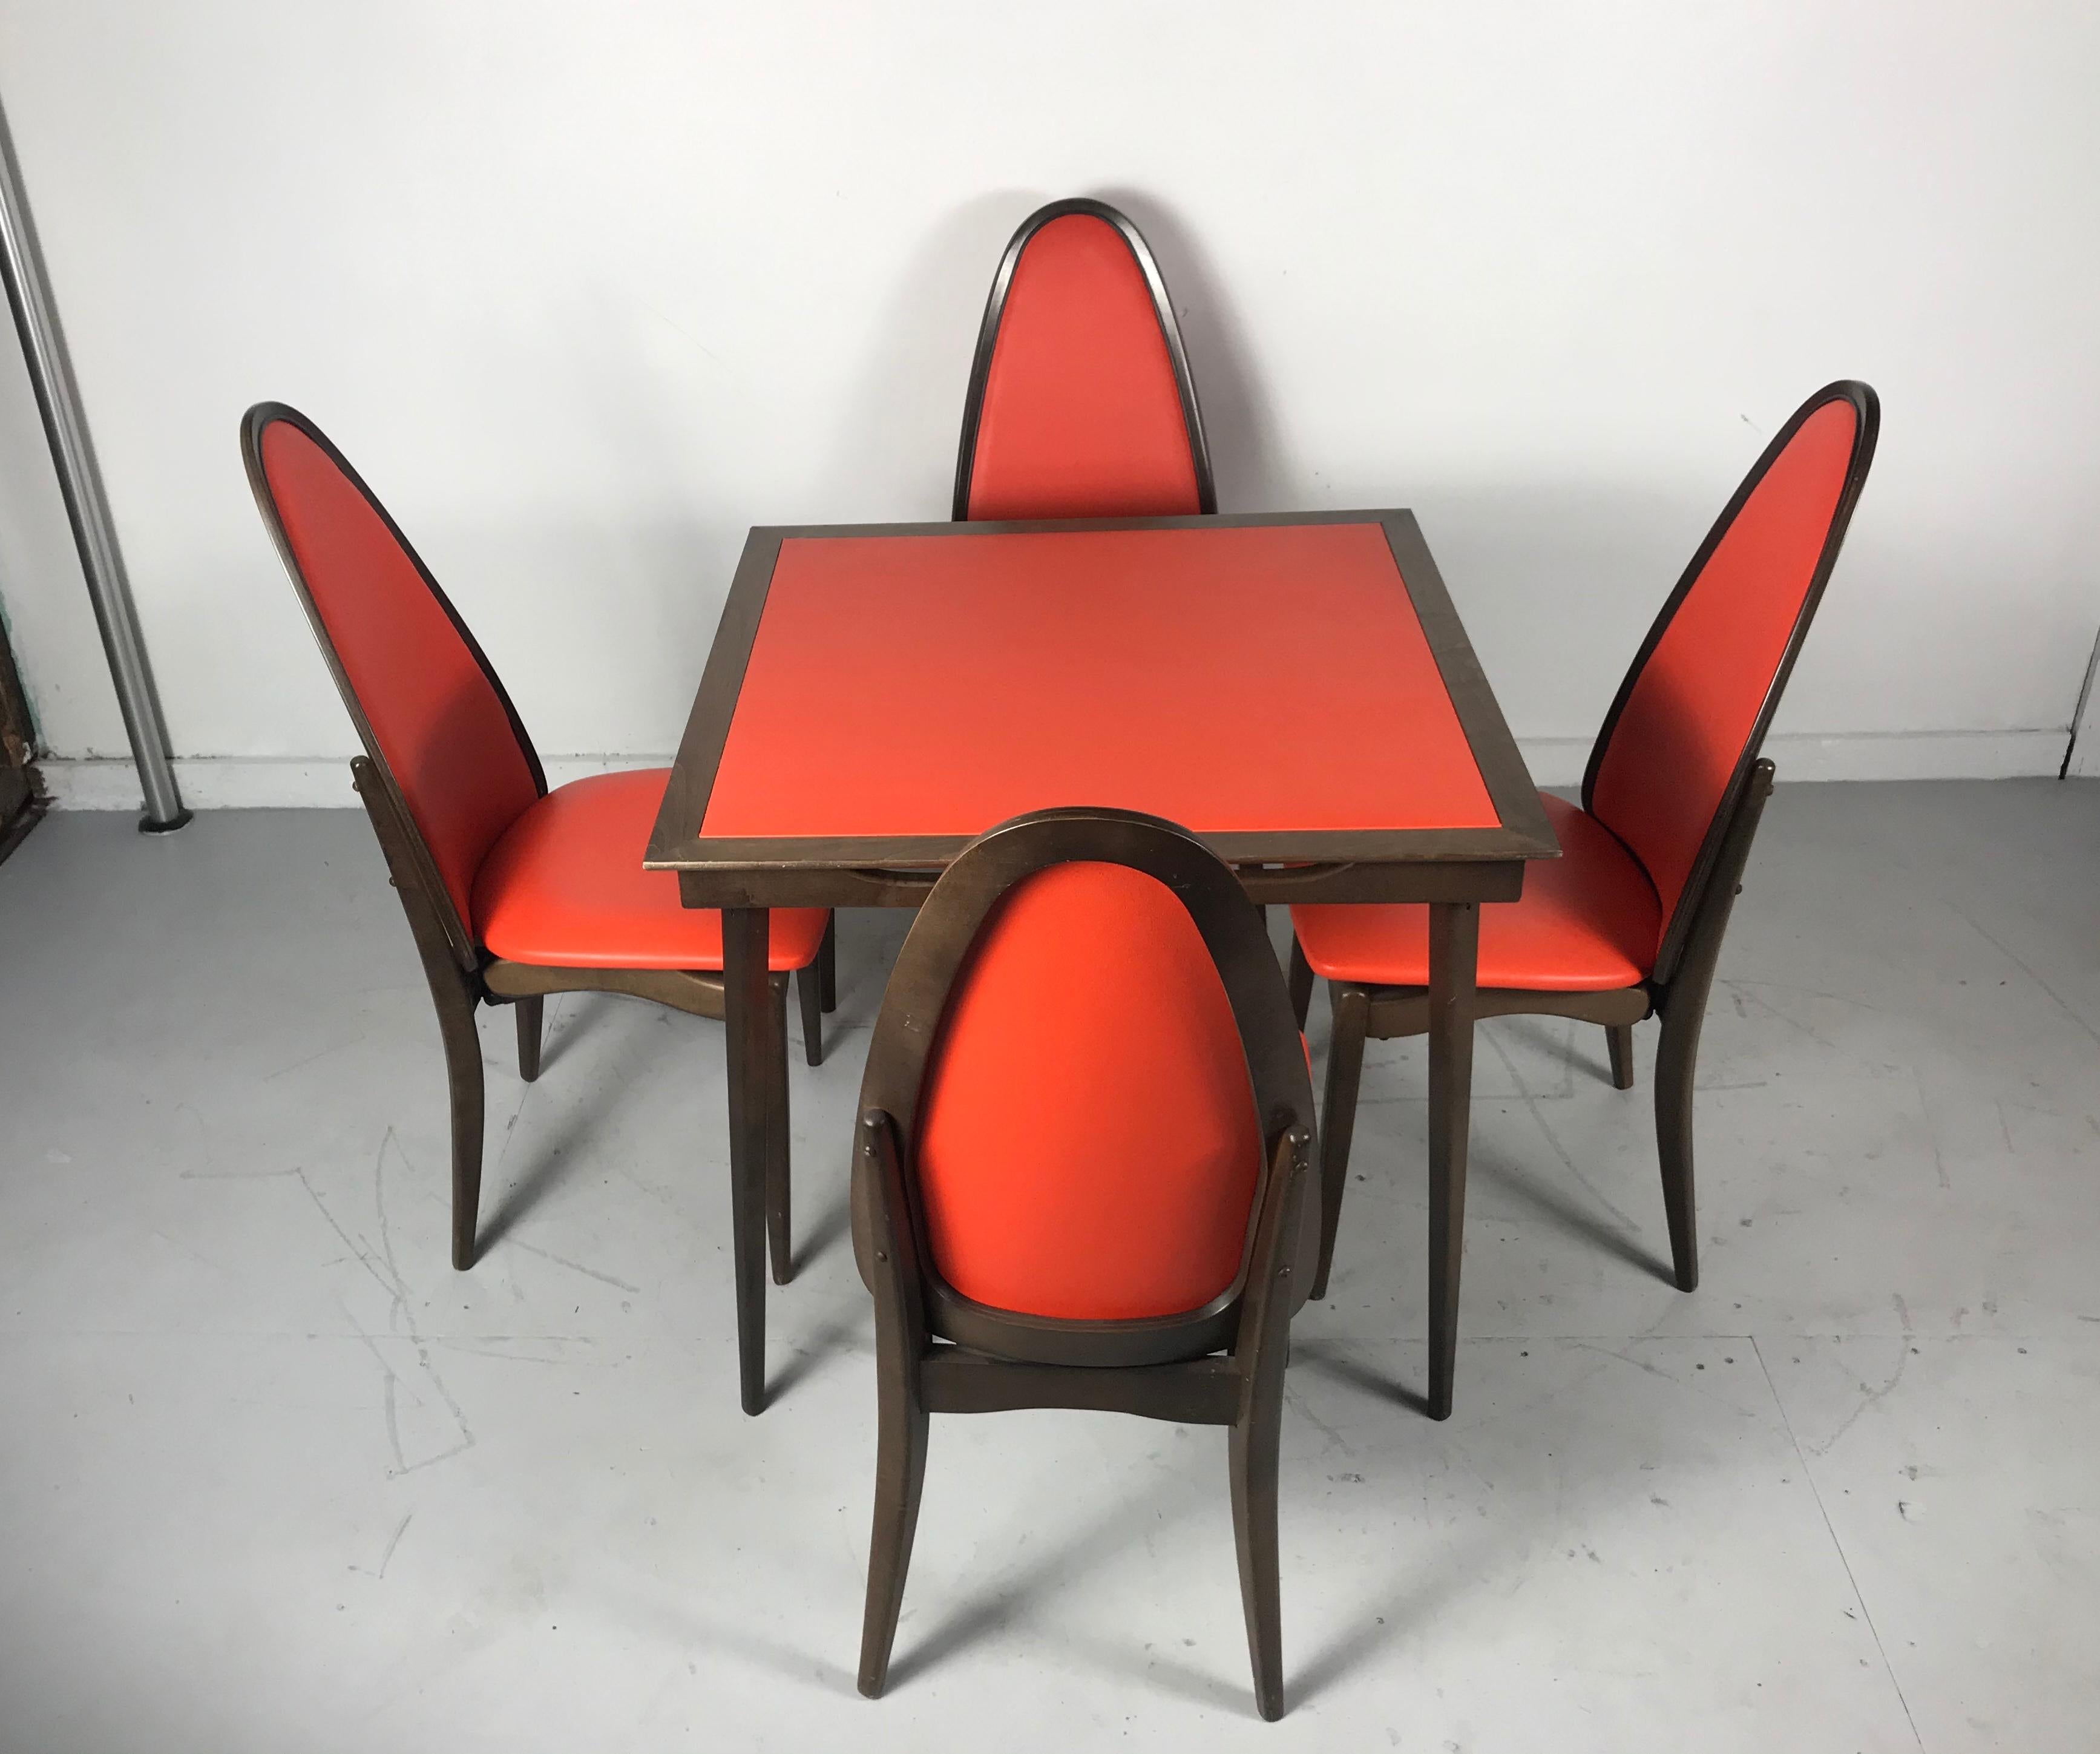 Elegant stylized folding table and chairs mfg by Stakmore Furniture Co., amazing quality and construction, no wonder they're slogan is the folding furniture with the permanent look.....retains original bright orange Naugahyde upholstery and tabletop